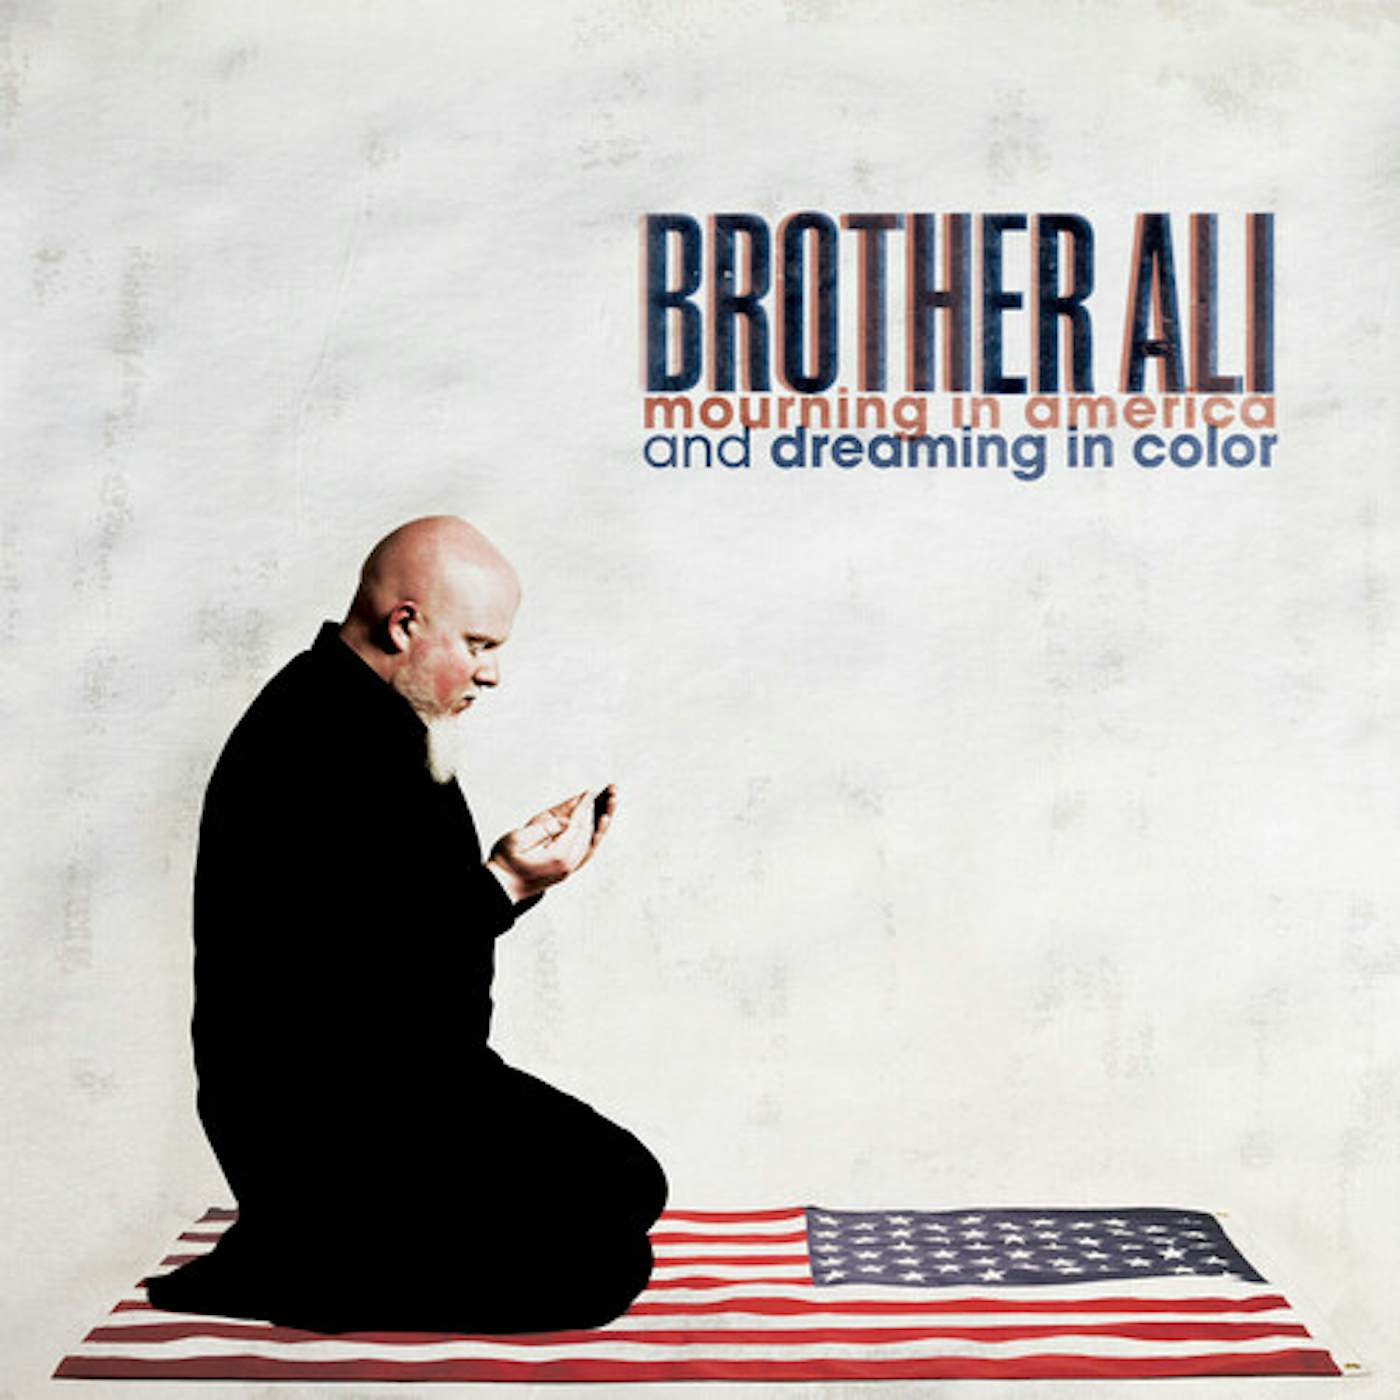 Brother Ali Mourning In America And Dreaming In Color Vinyl Record